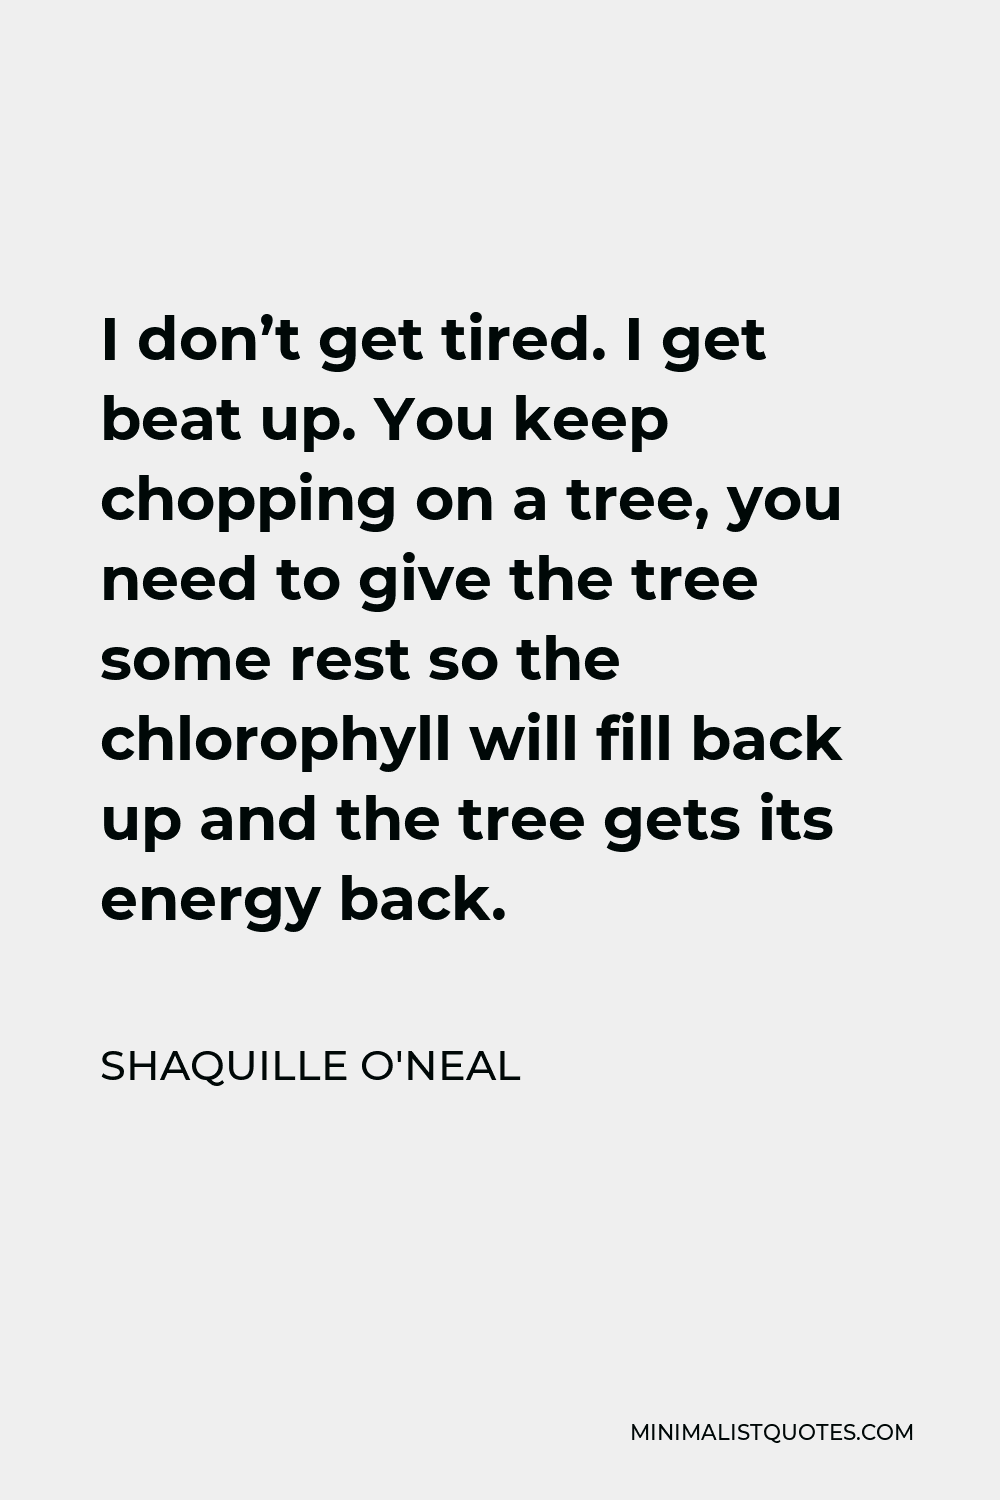 Shaquille O'Neal Quote - I don’t get tired. I get beat up. You keep chopping on a tree, you need to give the tree some rest so the chlorophyll will fill back up and the tree gets its energy back.